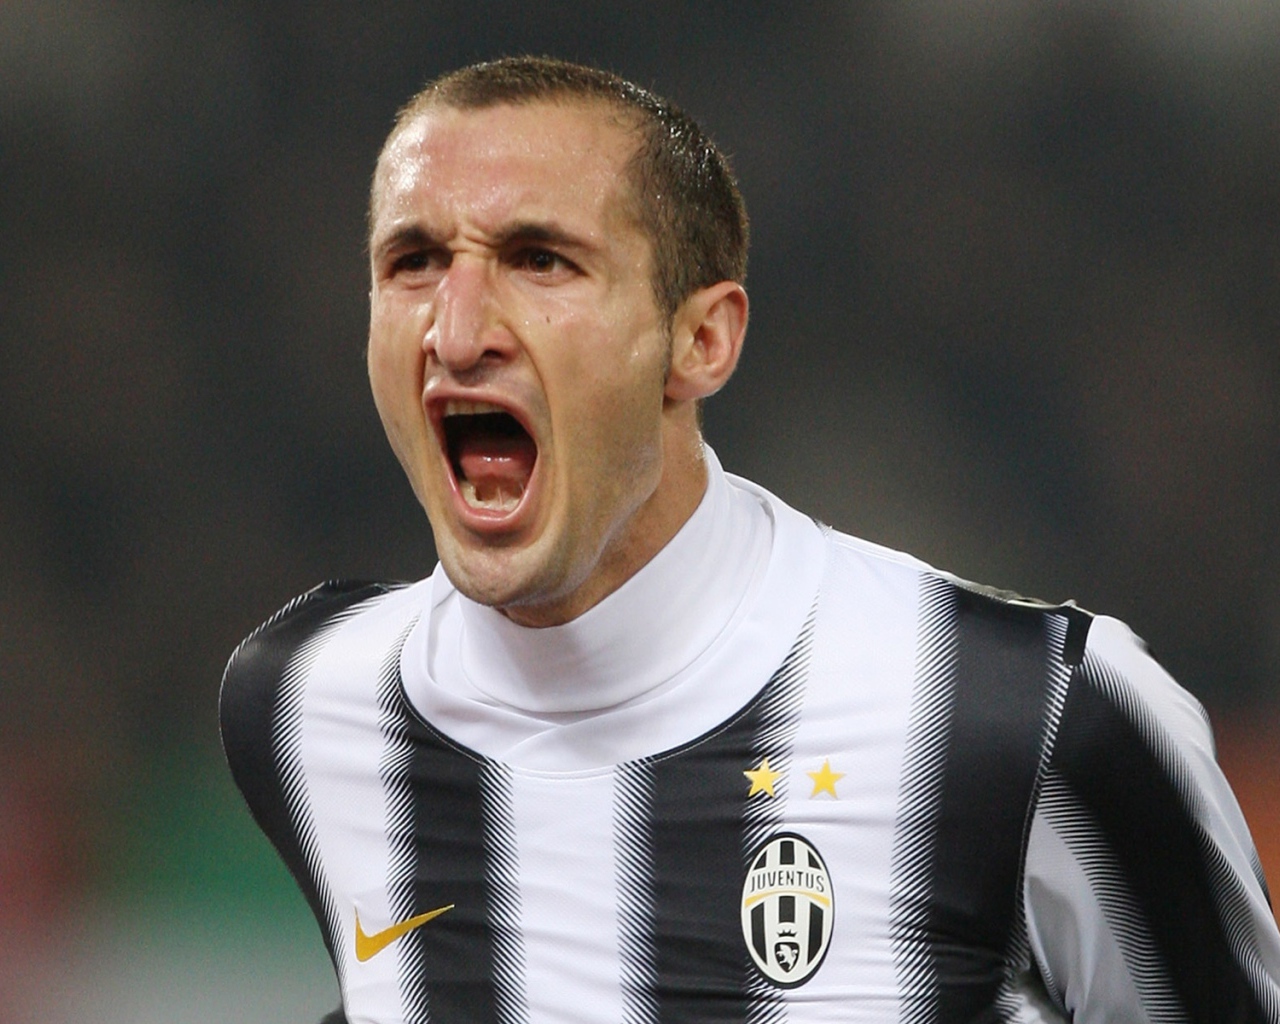 The football player of Juventus Giorgio Chiellini is shouting